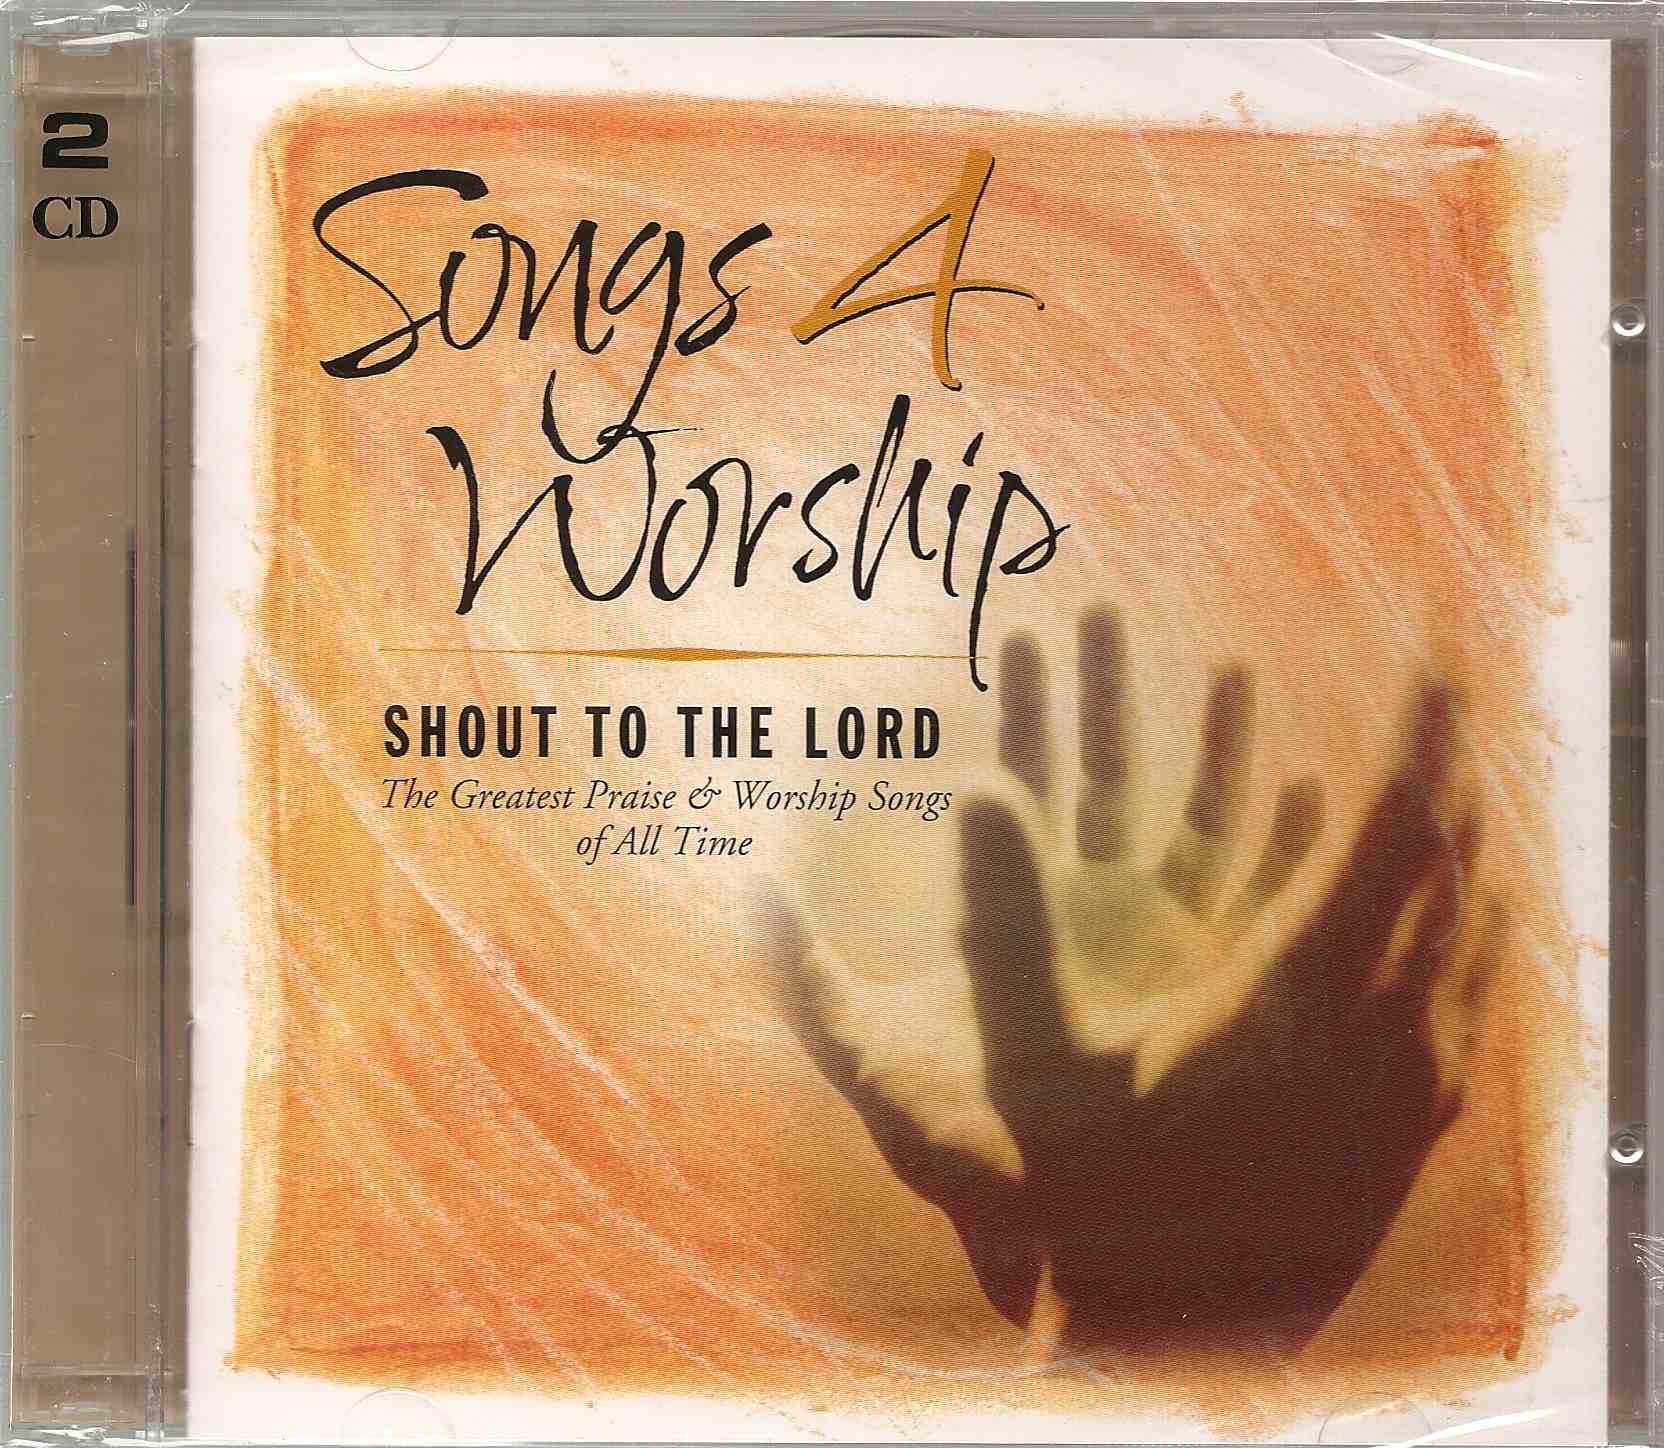 Songs 4 Worshp- Shout to the Lord